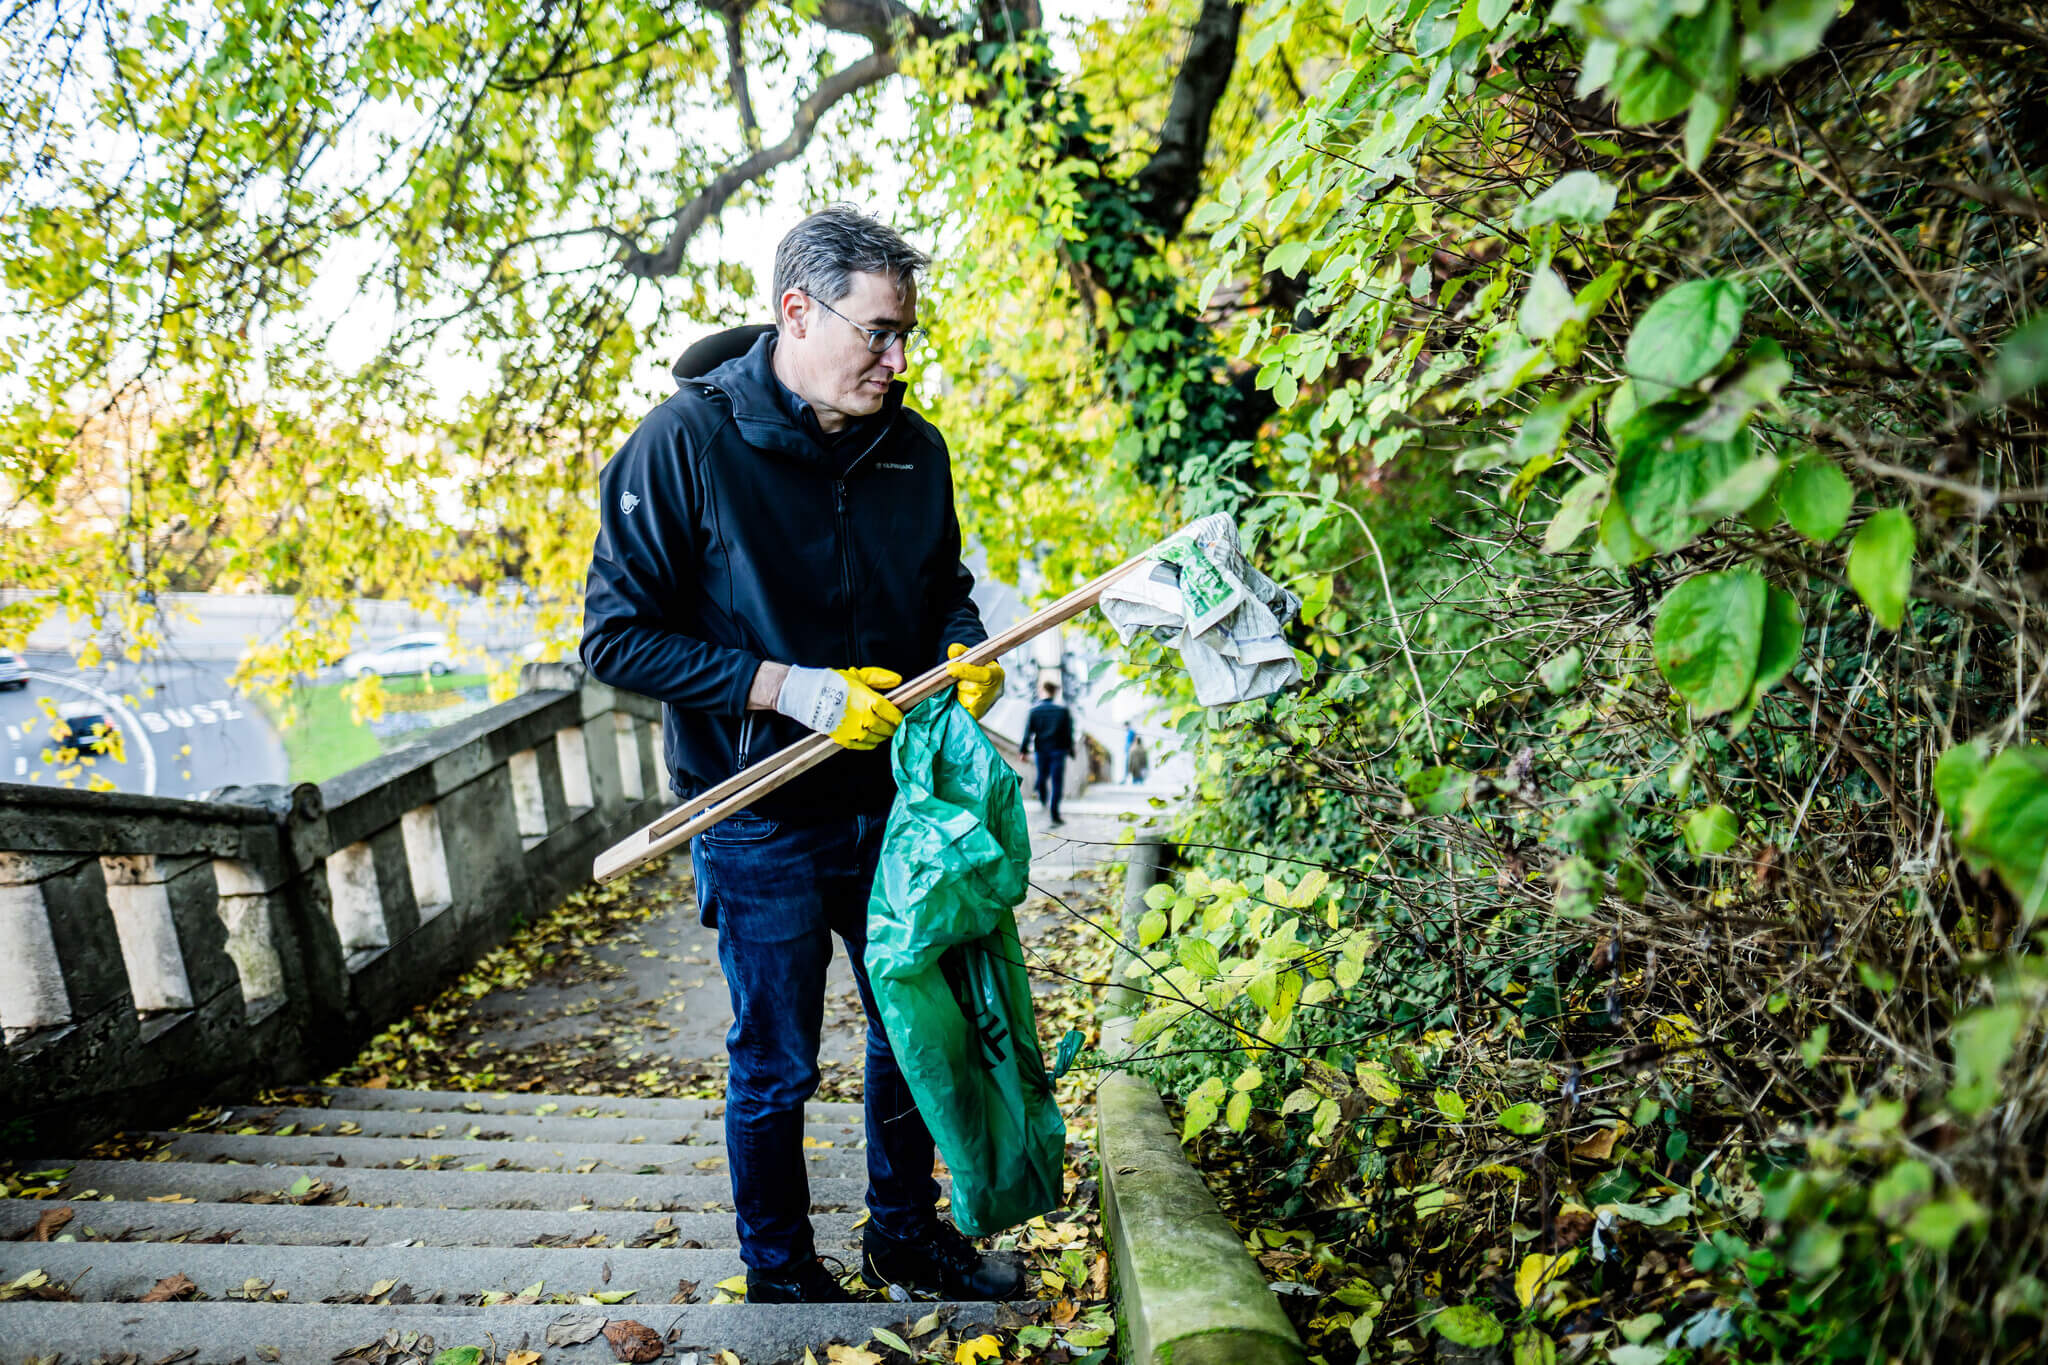 Big Clean Up in Budapest for 150th Birthday, 'Weeds in The City' Winner Revealed